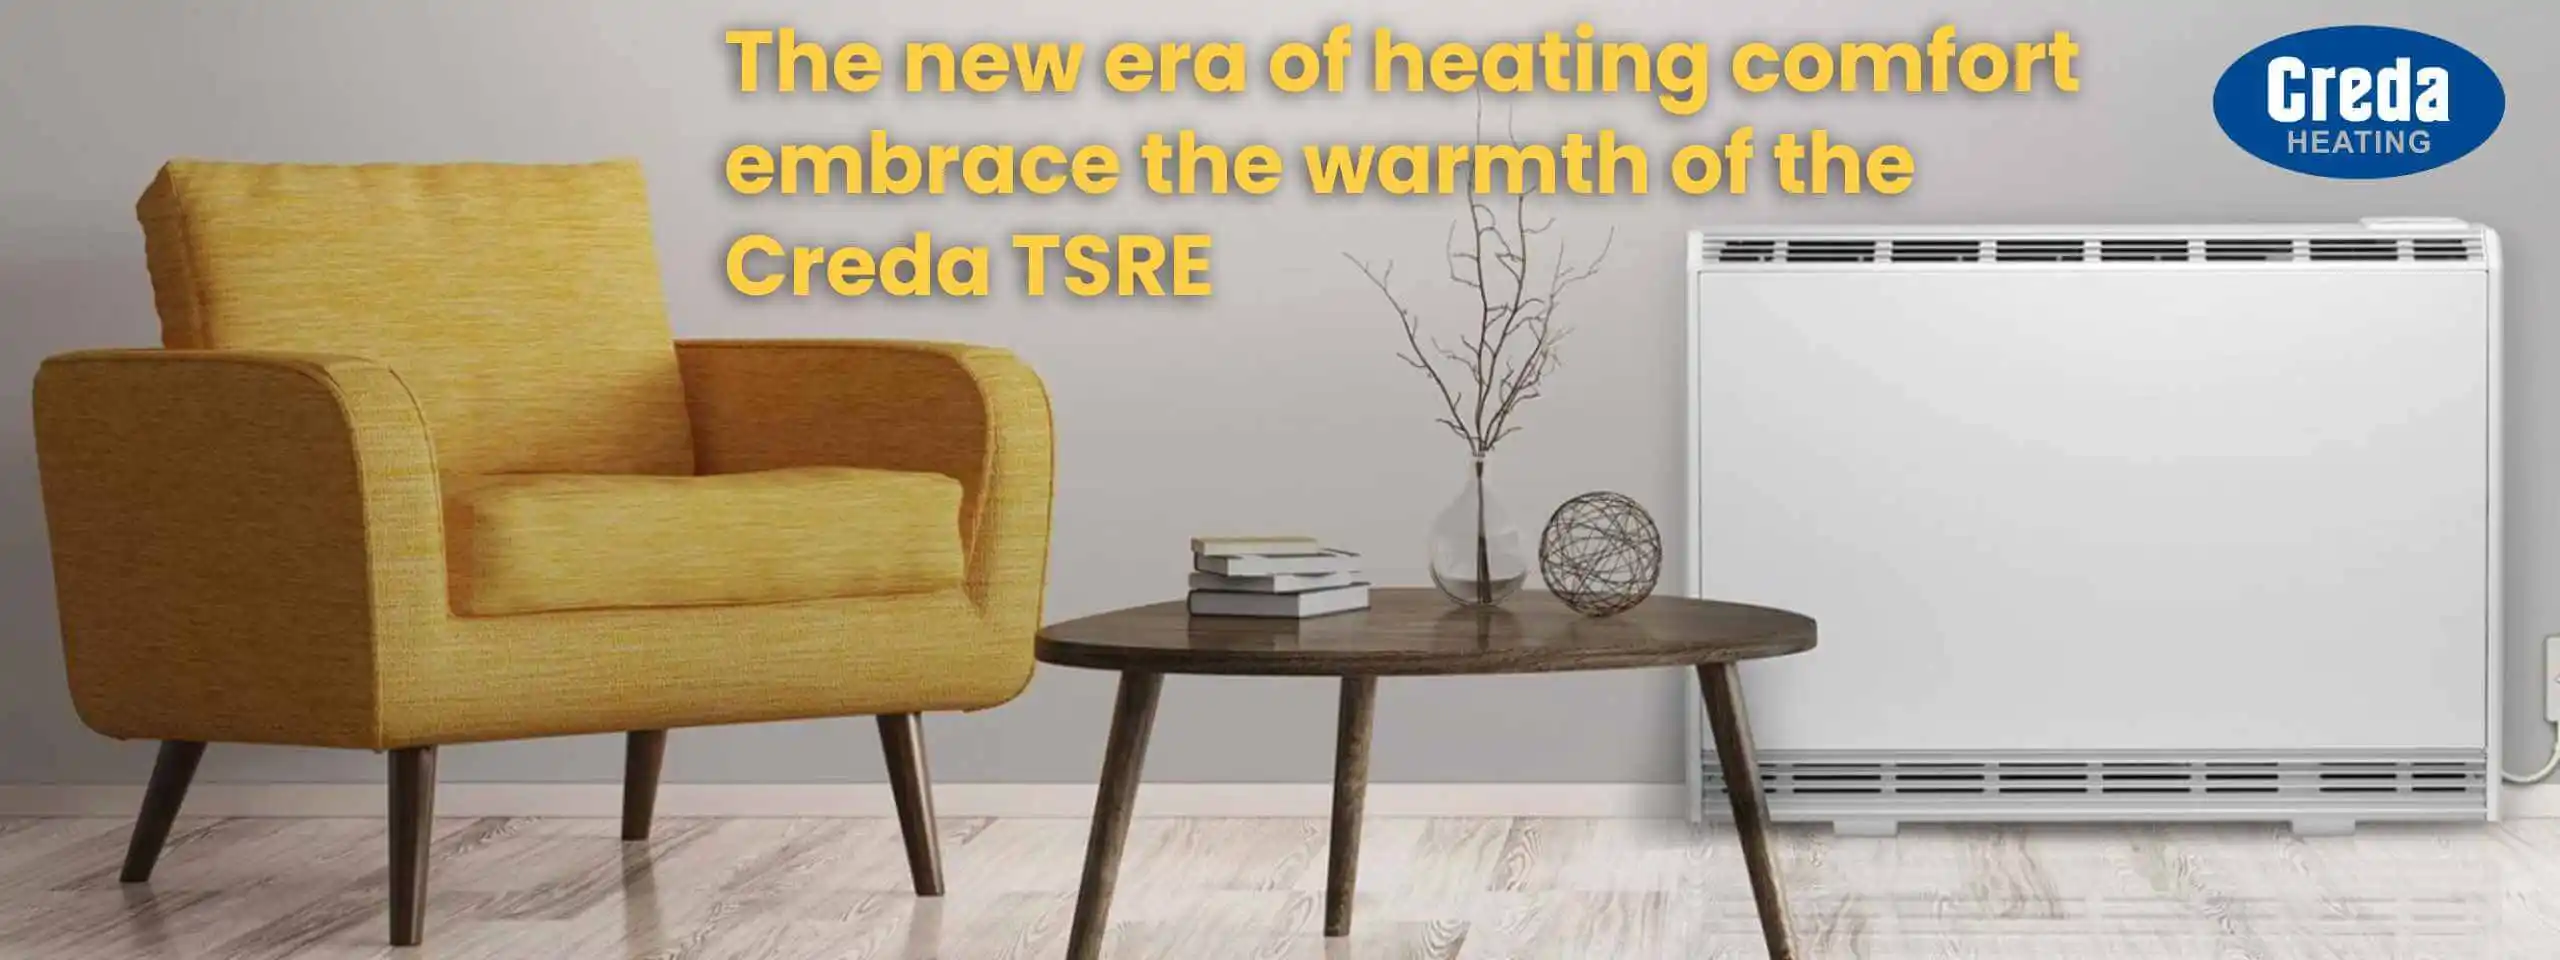 Image of the sleek Creda TSRE Storage heater with the slogan 'New era of heating. Embrace the warmth of the Creda TSRE storage heater.